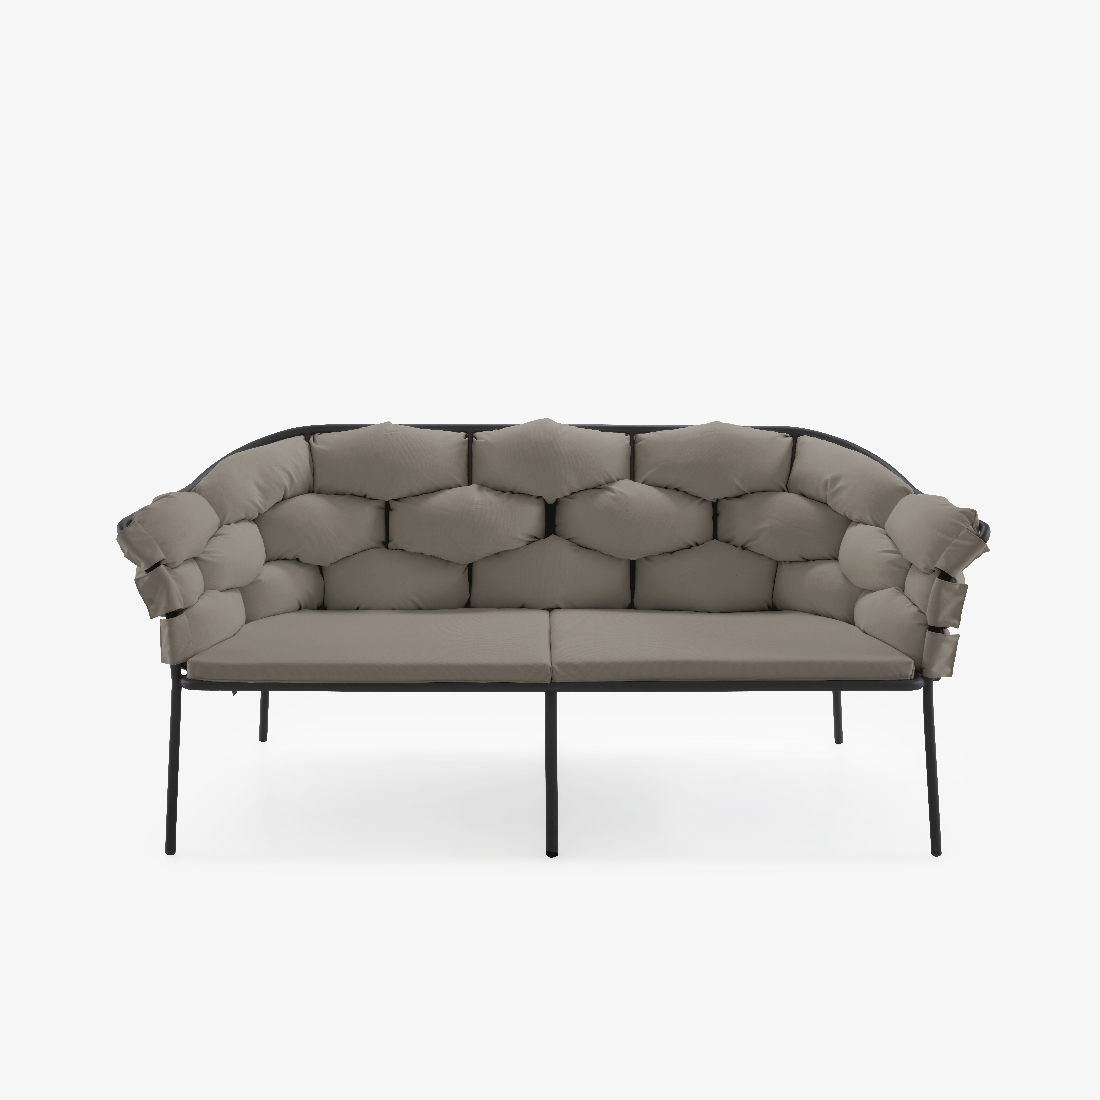 Image SMALL SETTEE TAUPE / CHARCOAL STRUCTURE 